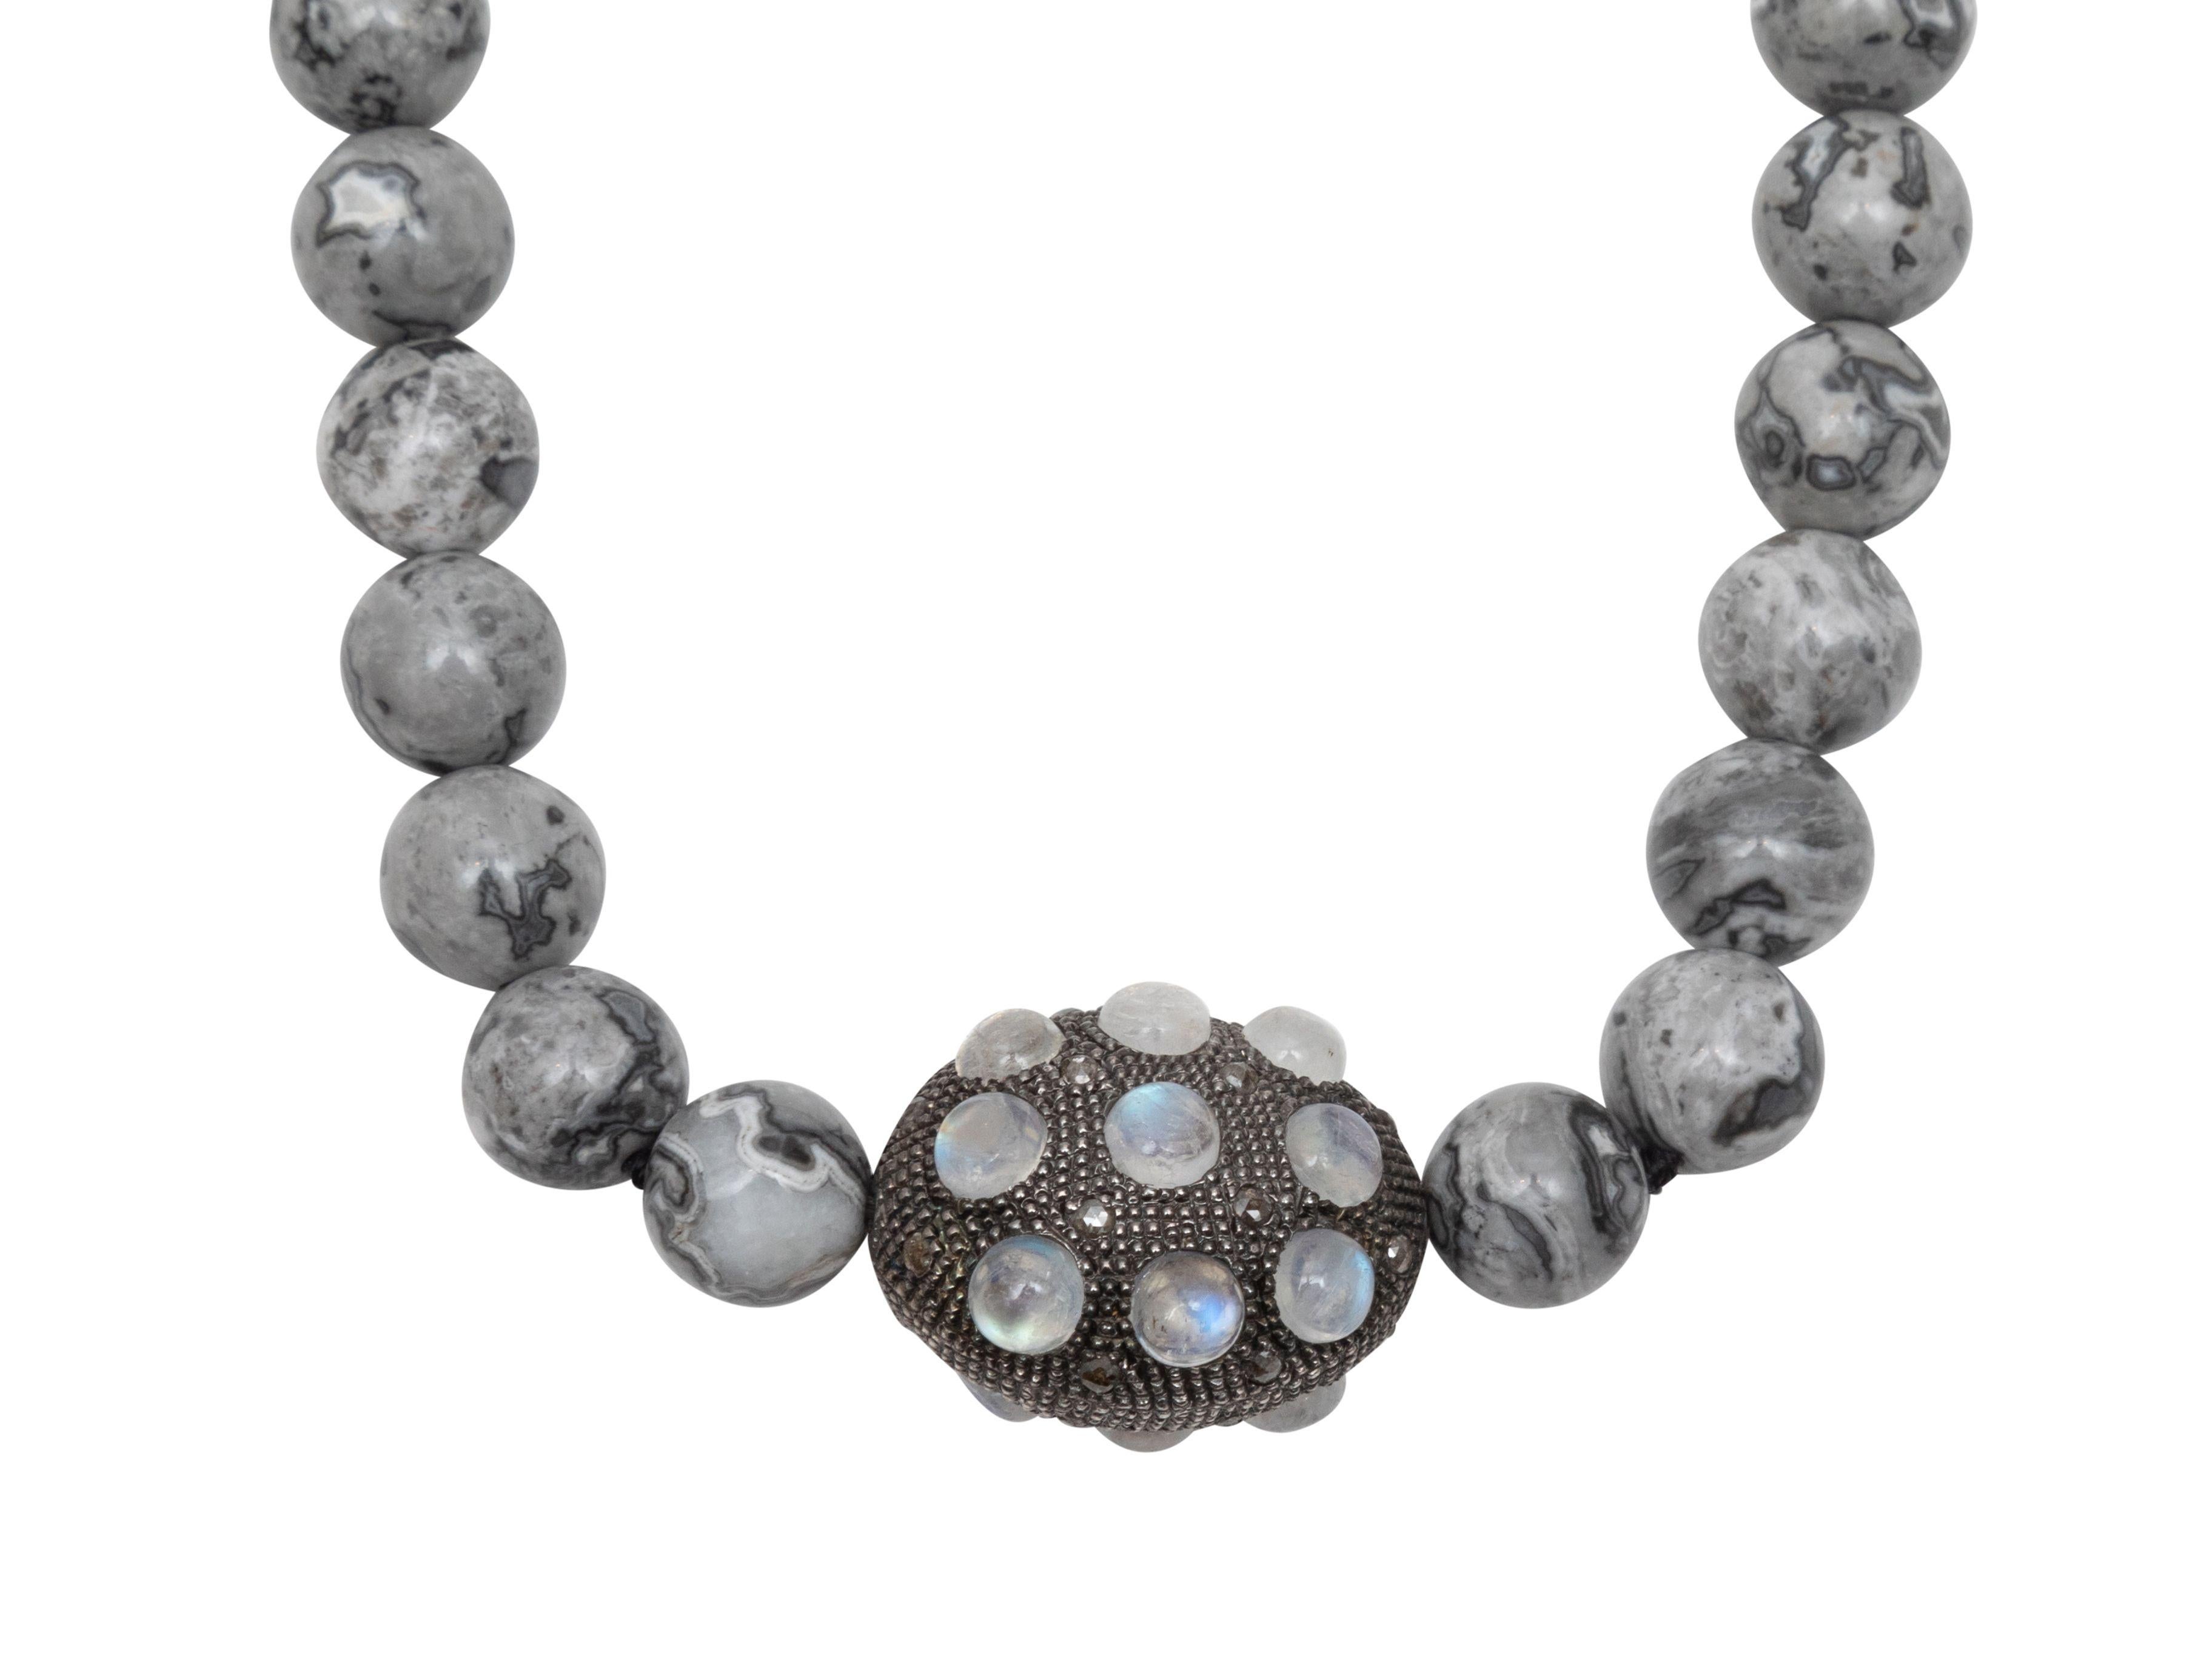 Product Details: Grey marble beaded strand necklace by Banva. Center pendant featuring moonstone and diamond embellishments. 15